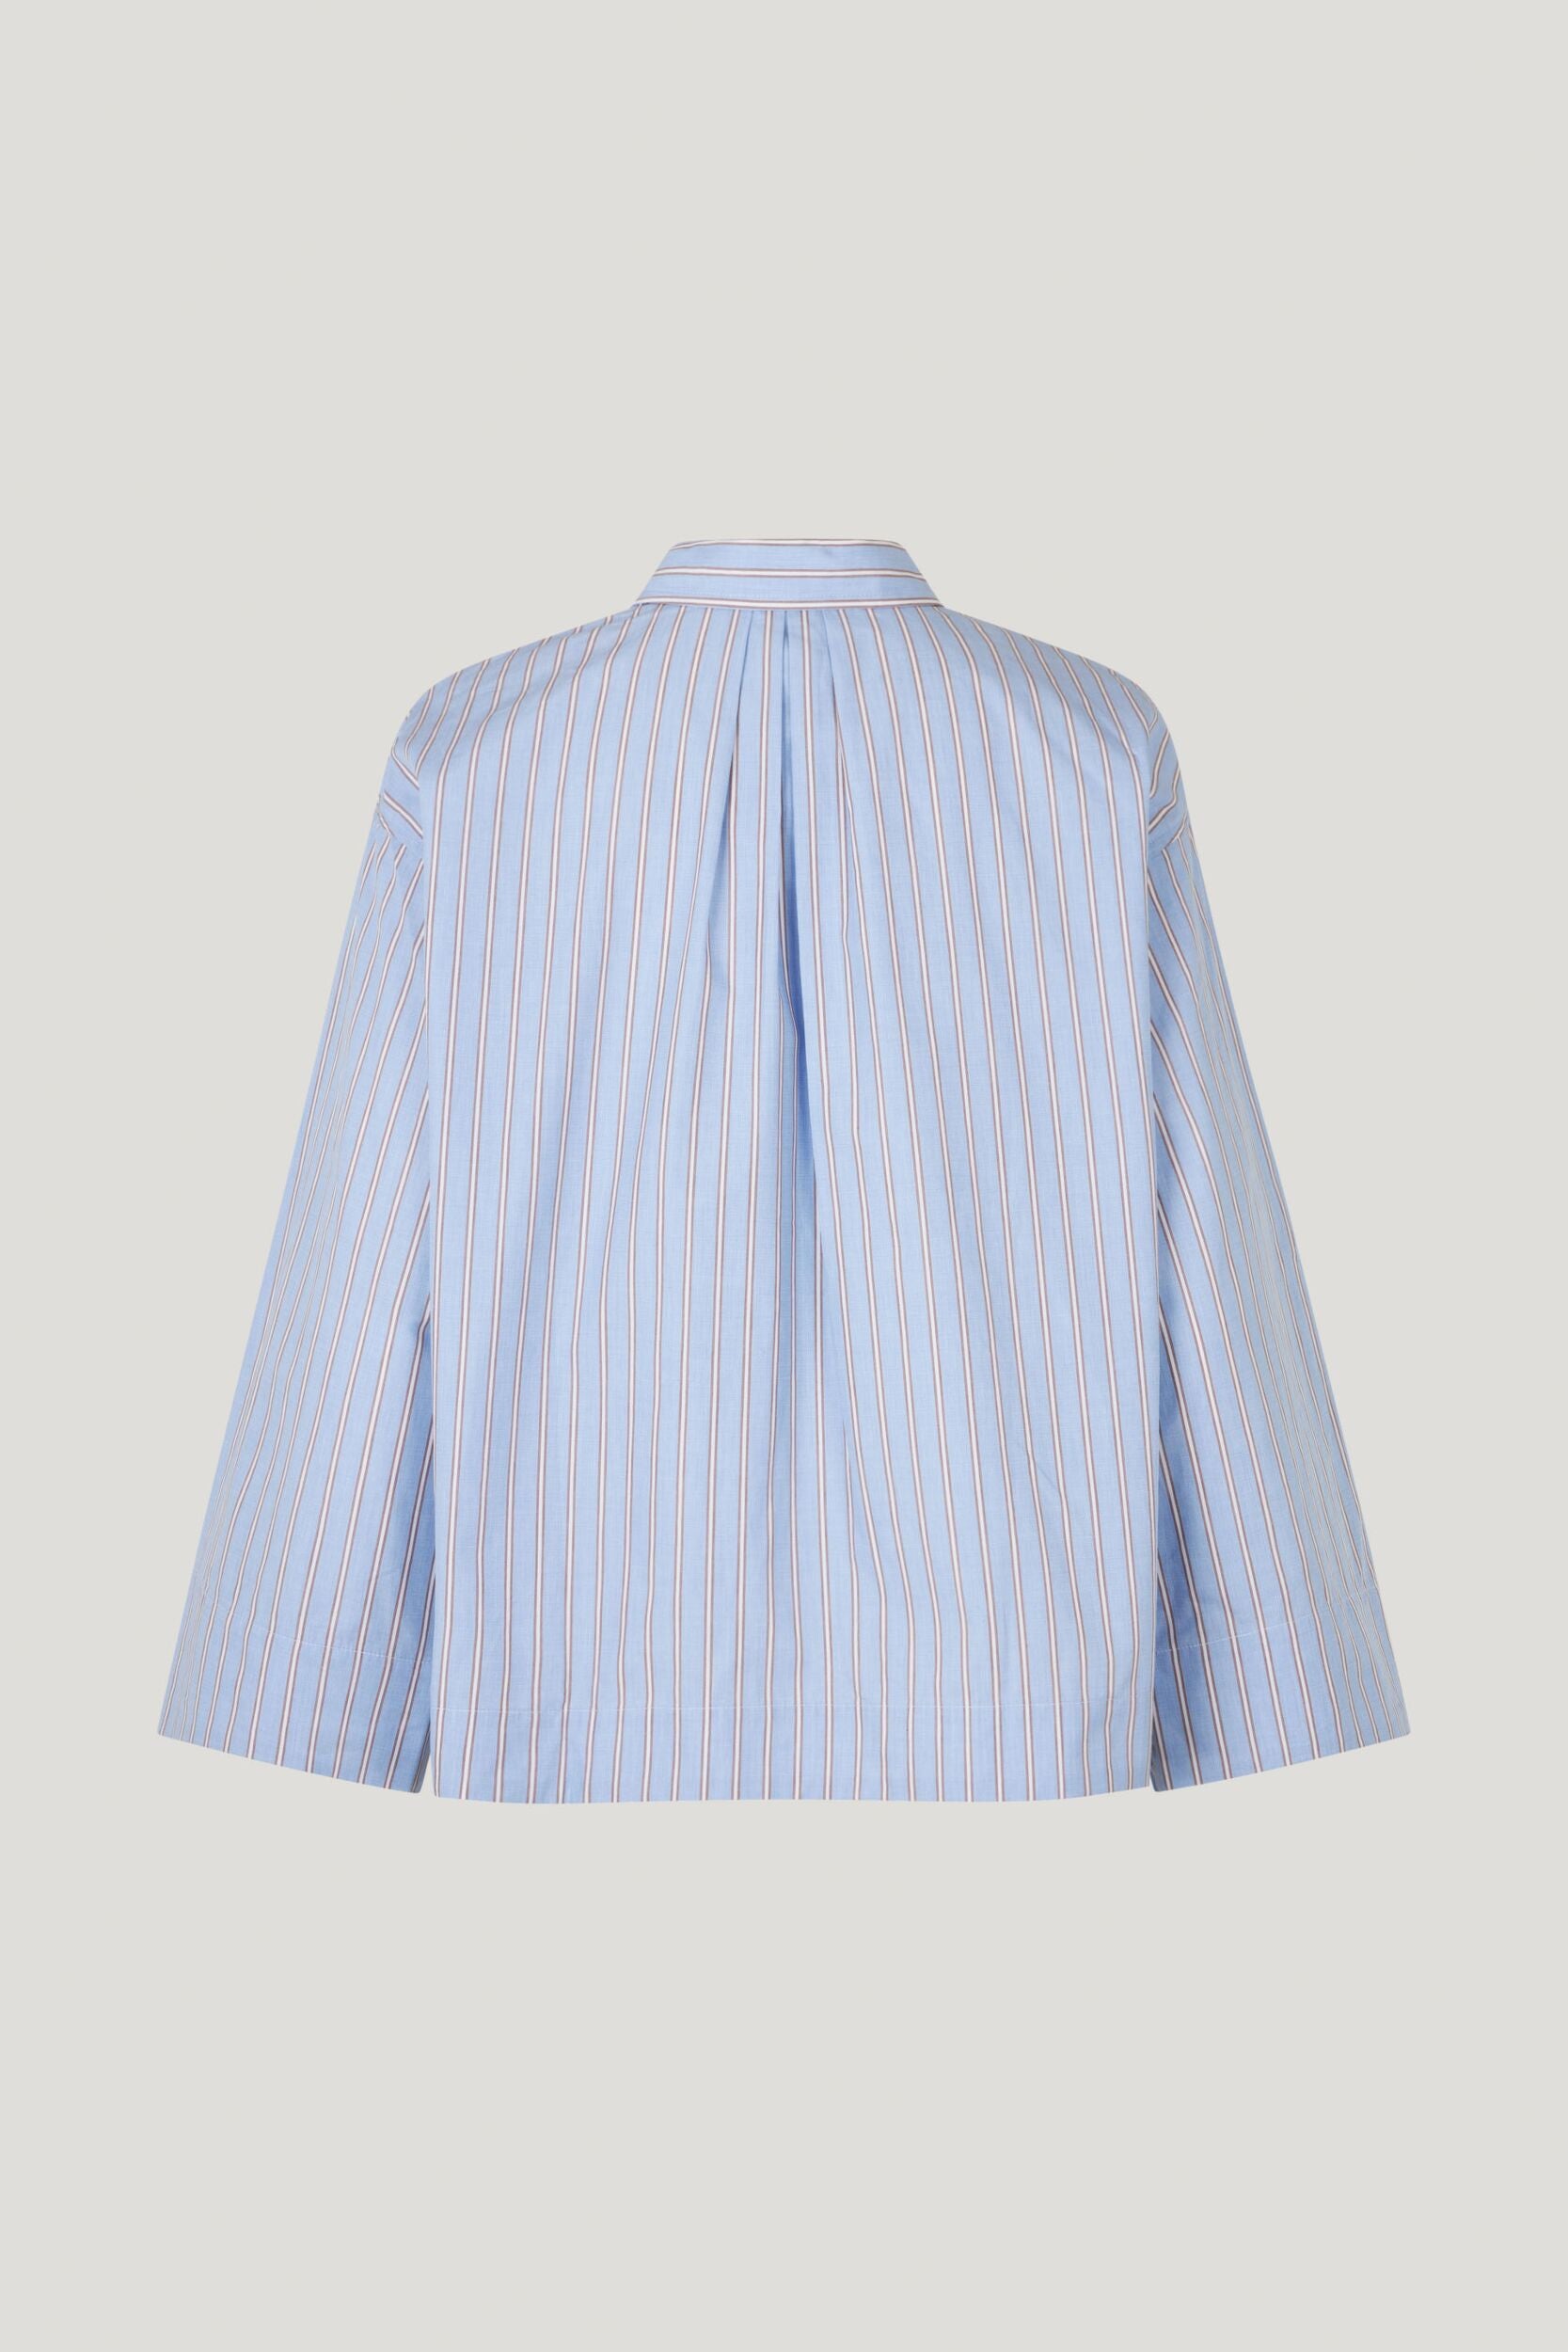 Blue and white pin striped shirt with classic collar full length placket and button fastening with wide sleeves